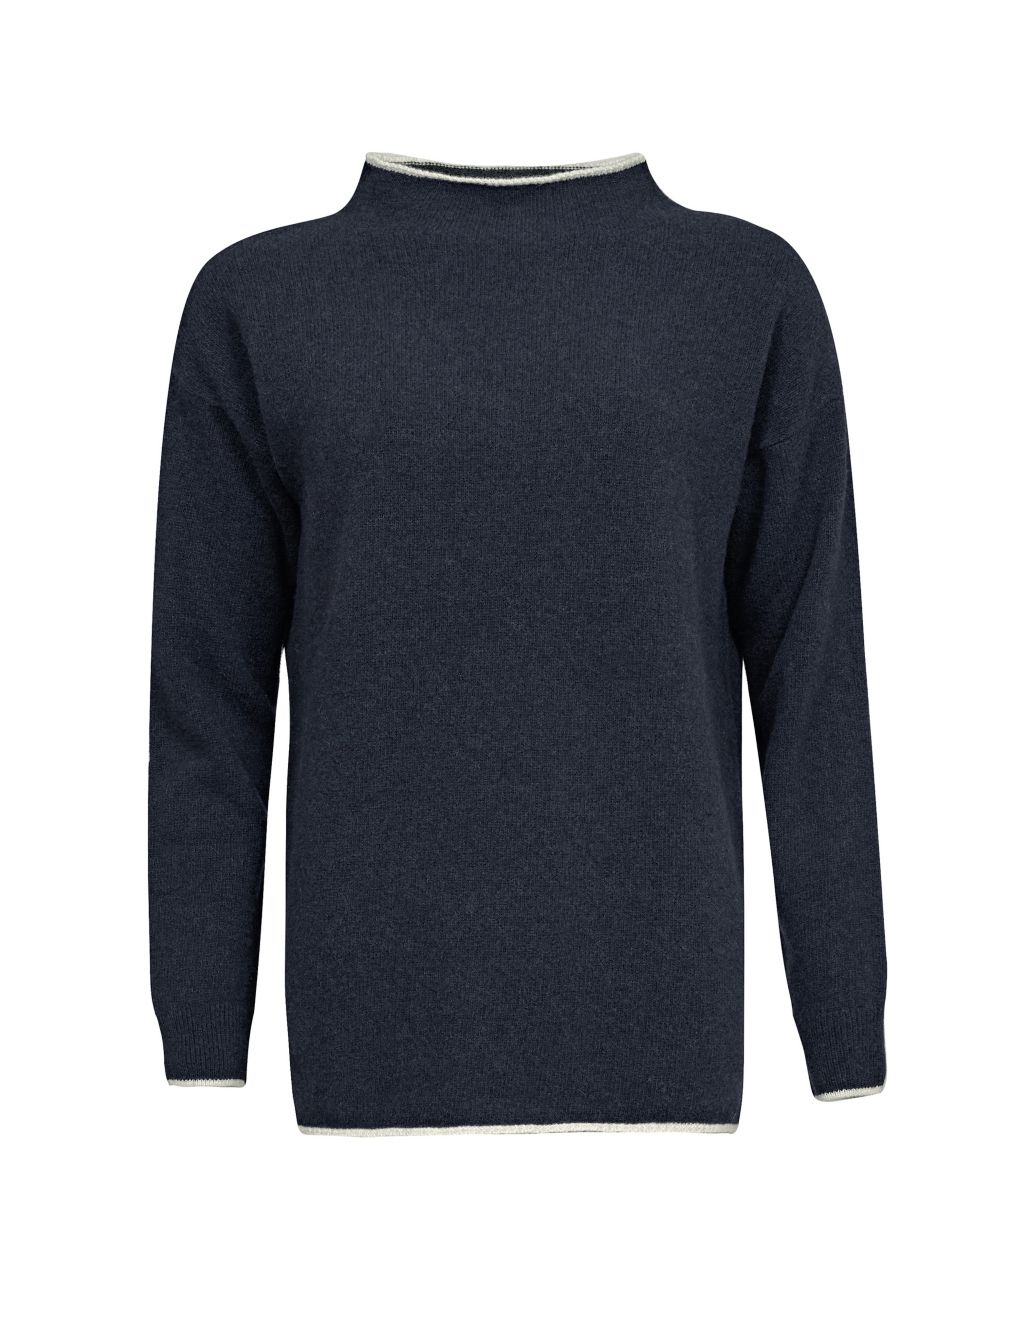 Pure Lambswool Funnel Neck Jumper image 2